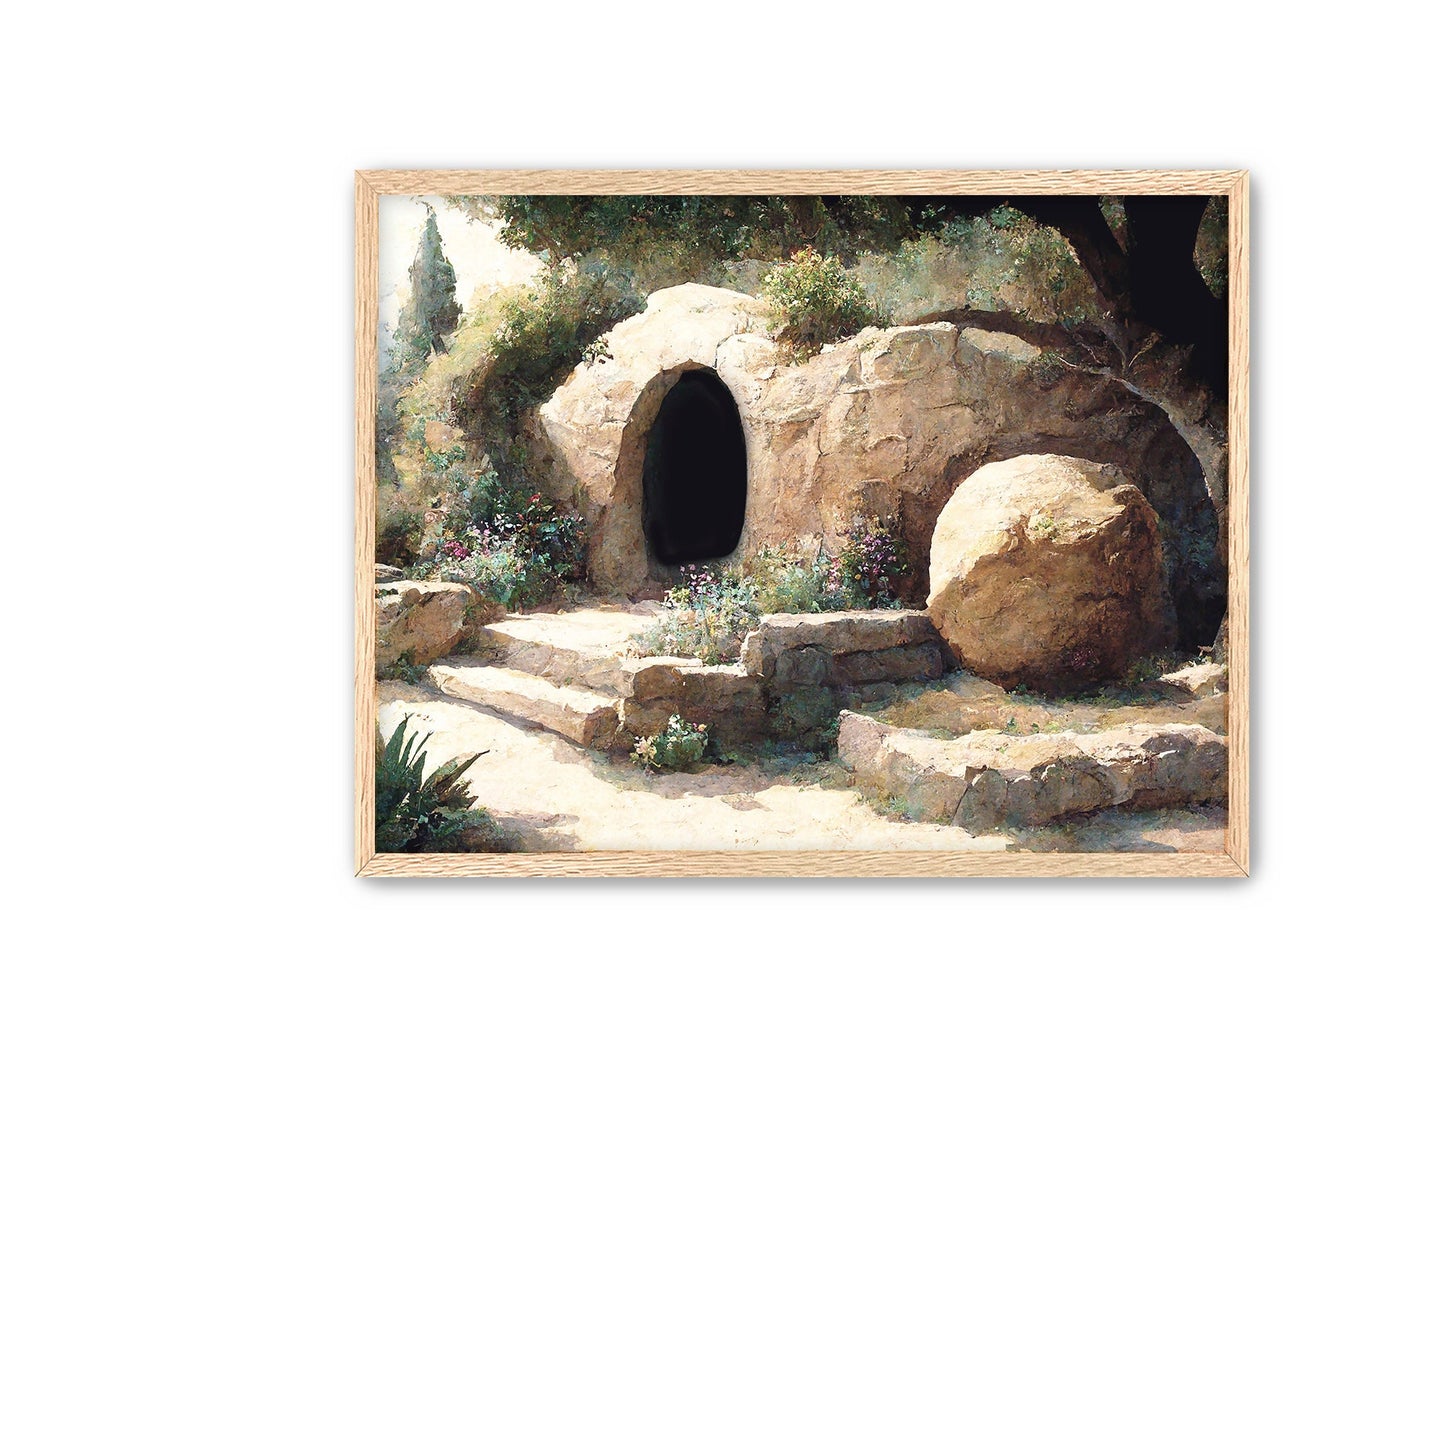 The Tomb is Empty FRAMED Fine Art Print / He is Risen / Christian Bible Art / Easter Wall Decor (Physical Product)